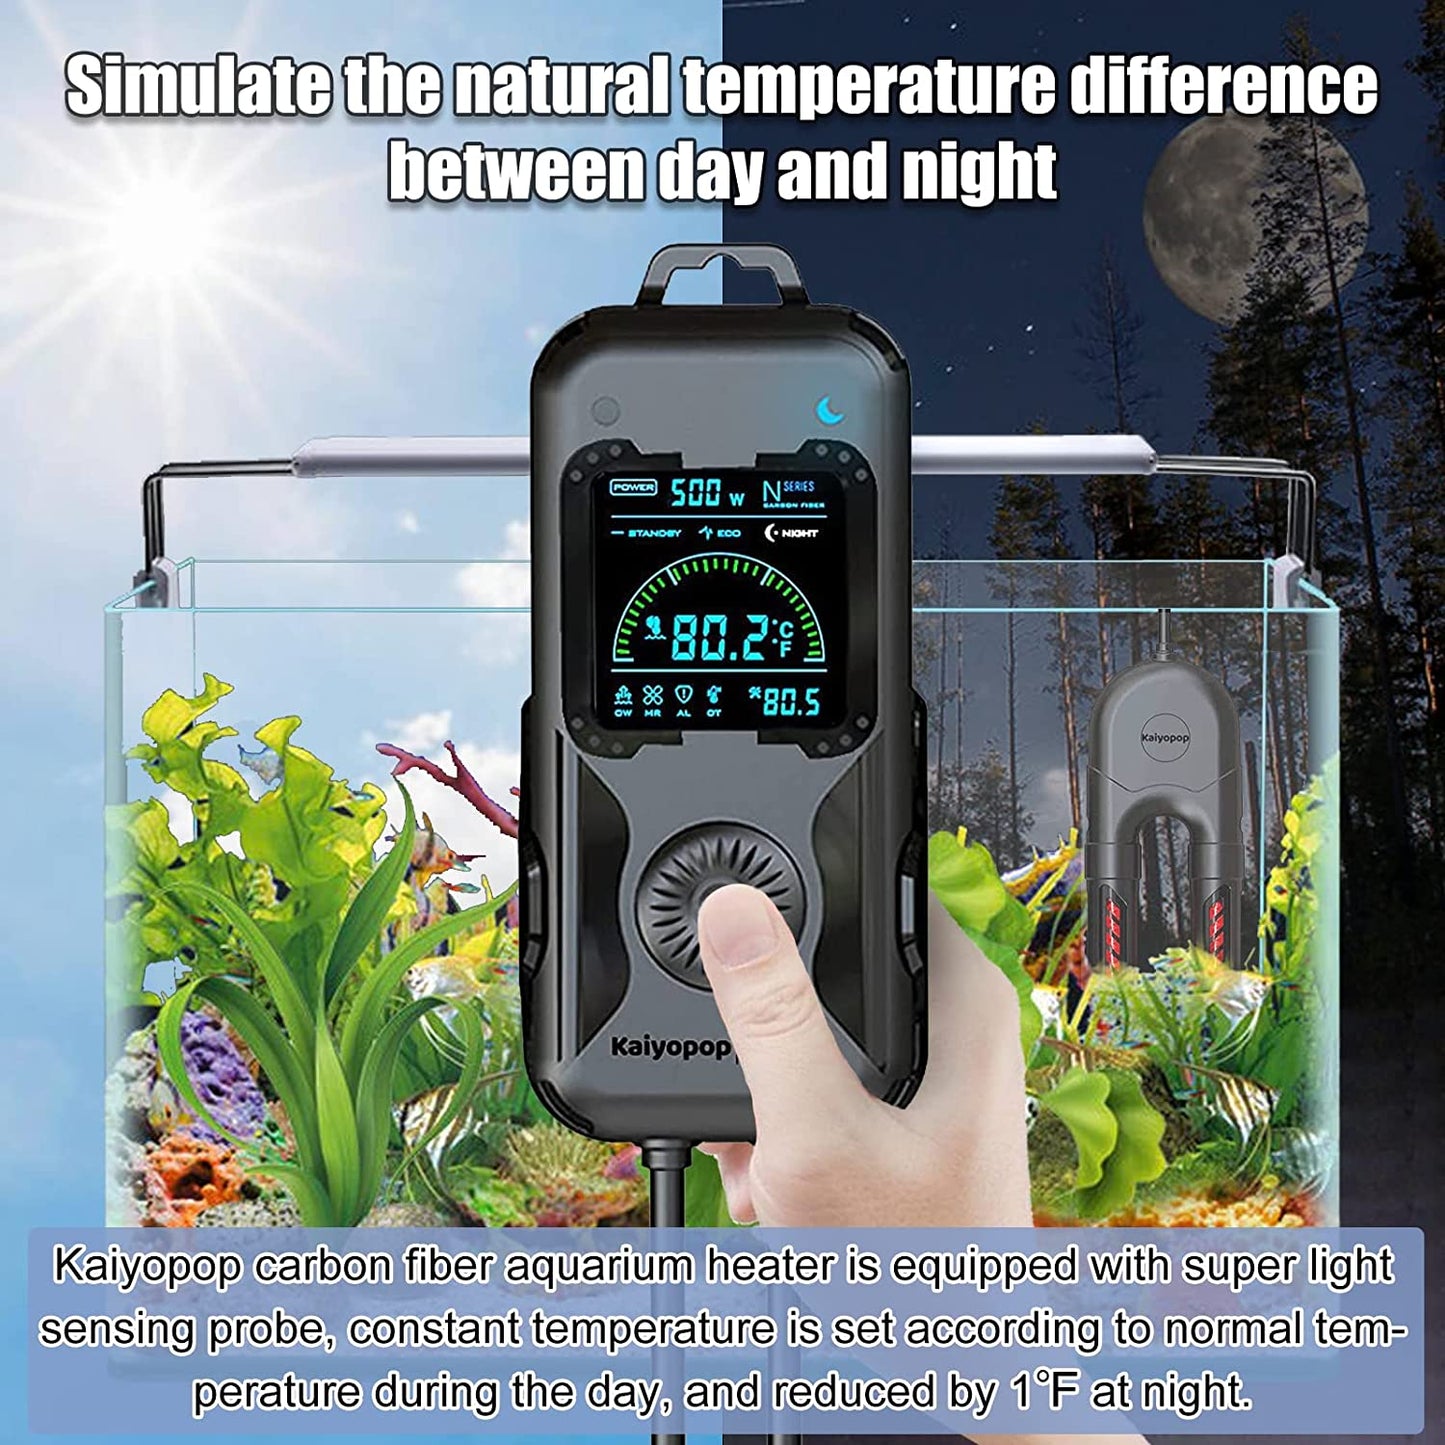 Simulate the natural temperature difference between day and night